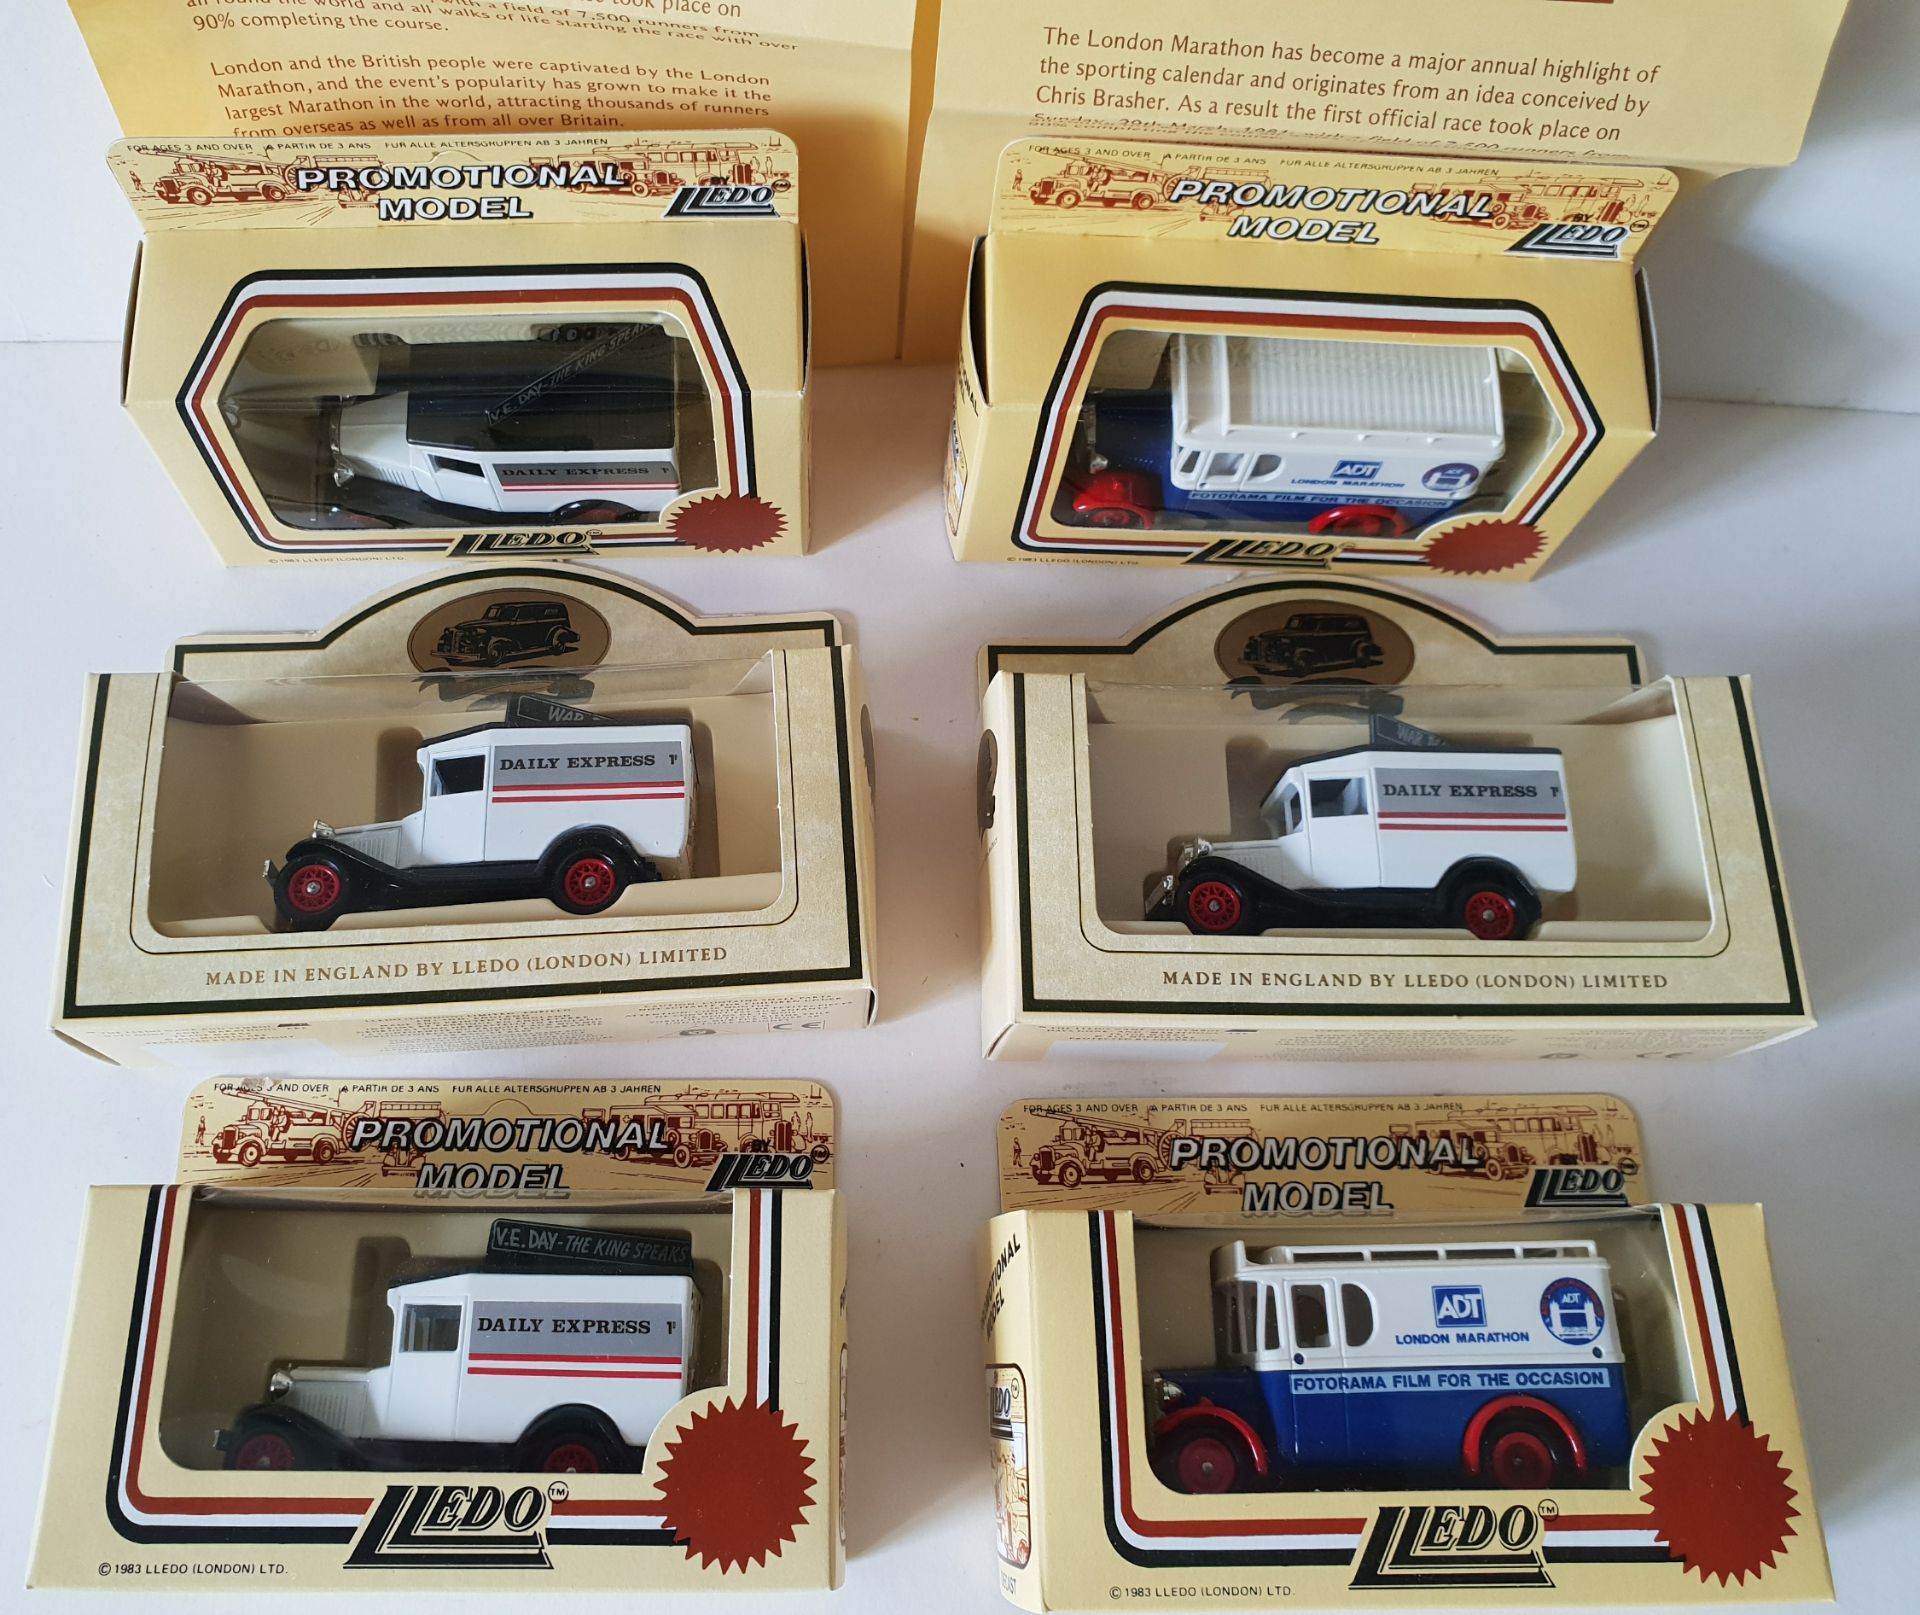 Vintage Boxed Collectable Lledo Die Cast Metal Toy Cars Adt & Daily Express Advertising - Image 2 of 3